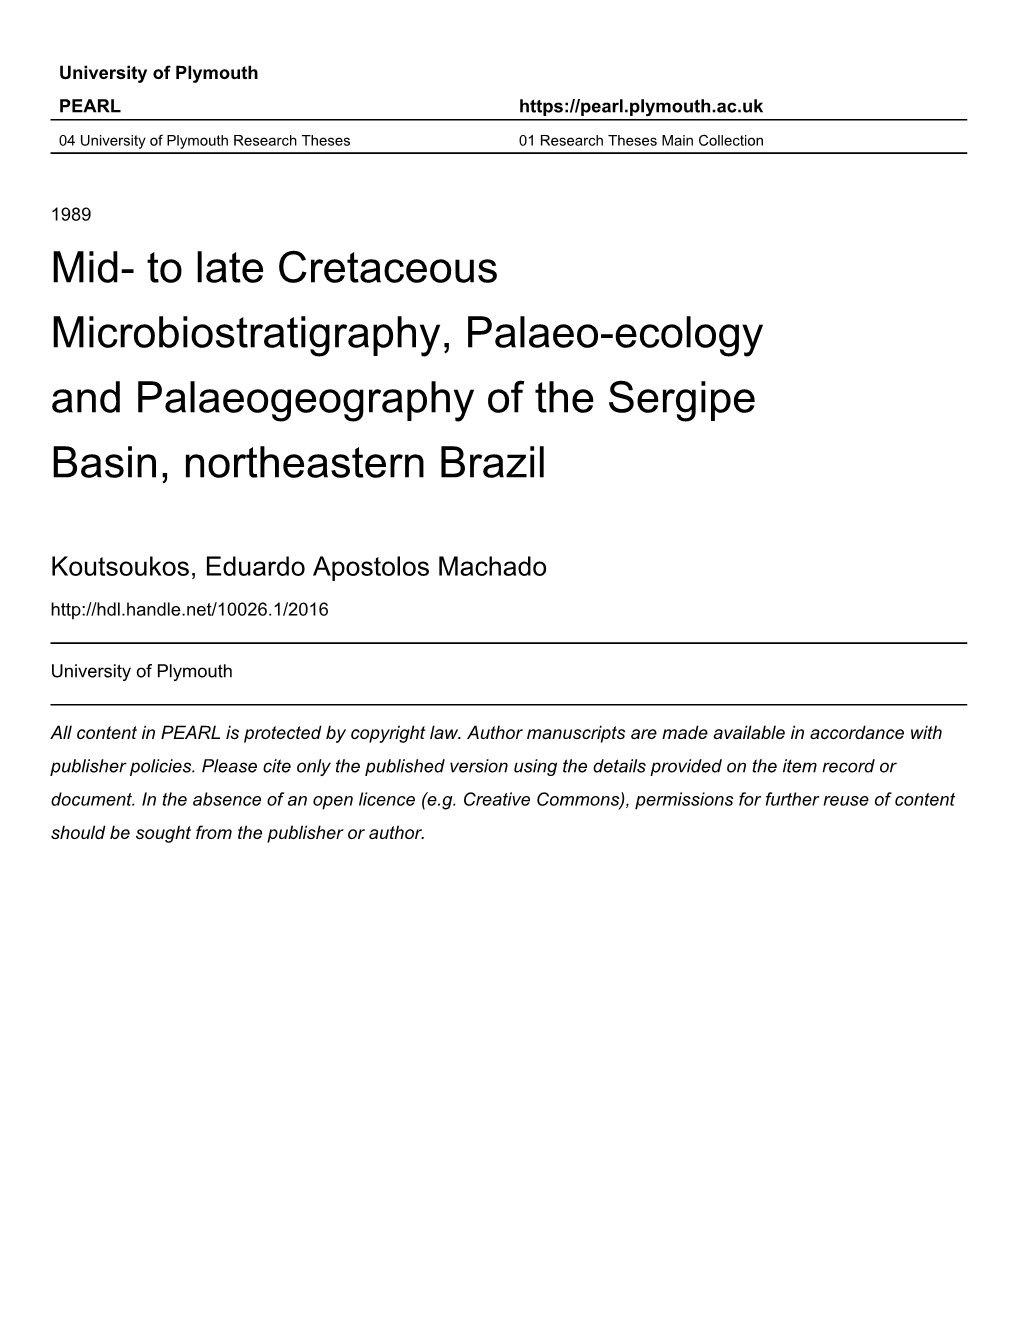 Mió- to Late Cretaceous Microbiostratigraphy/ Palaeo-Ecology and Palaeogeography of the Sergipe Basin, Northeastern Brazil Dece